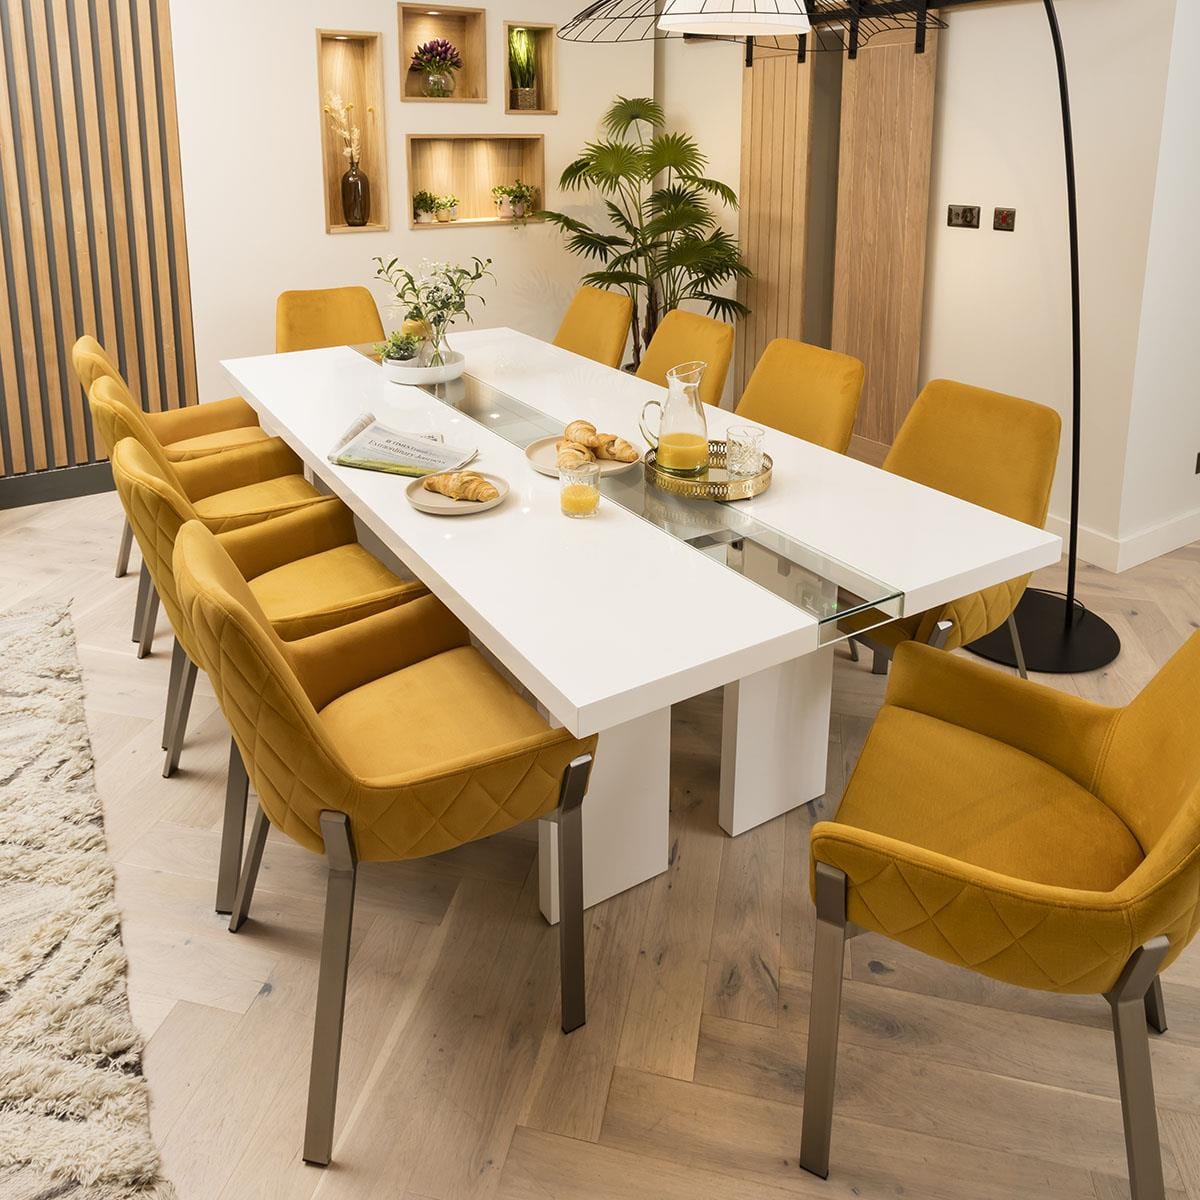 Quatropi Luna 10 Seater Dining Table and Chairs White Mustard